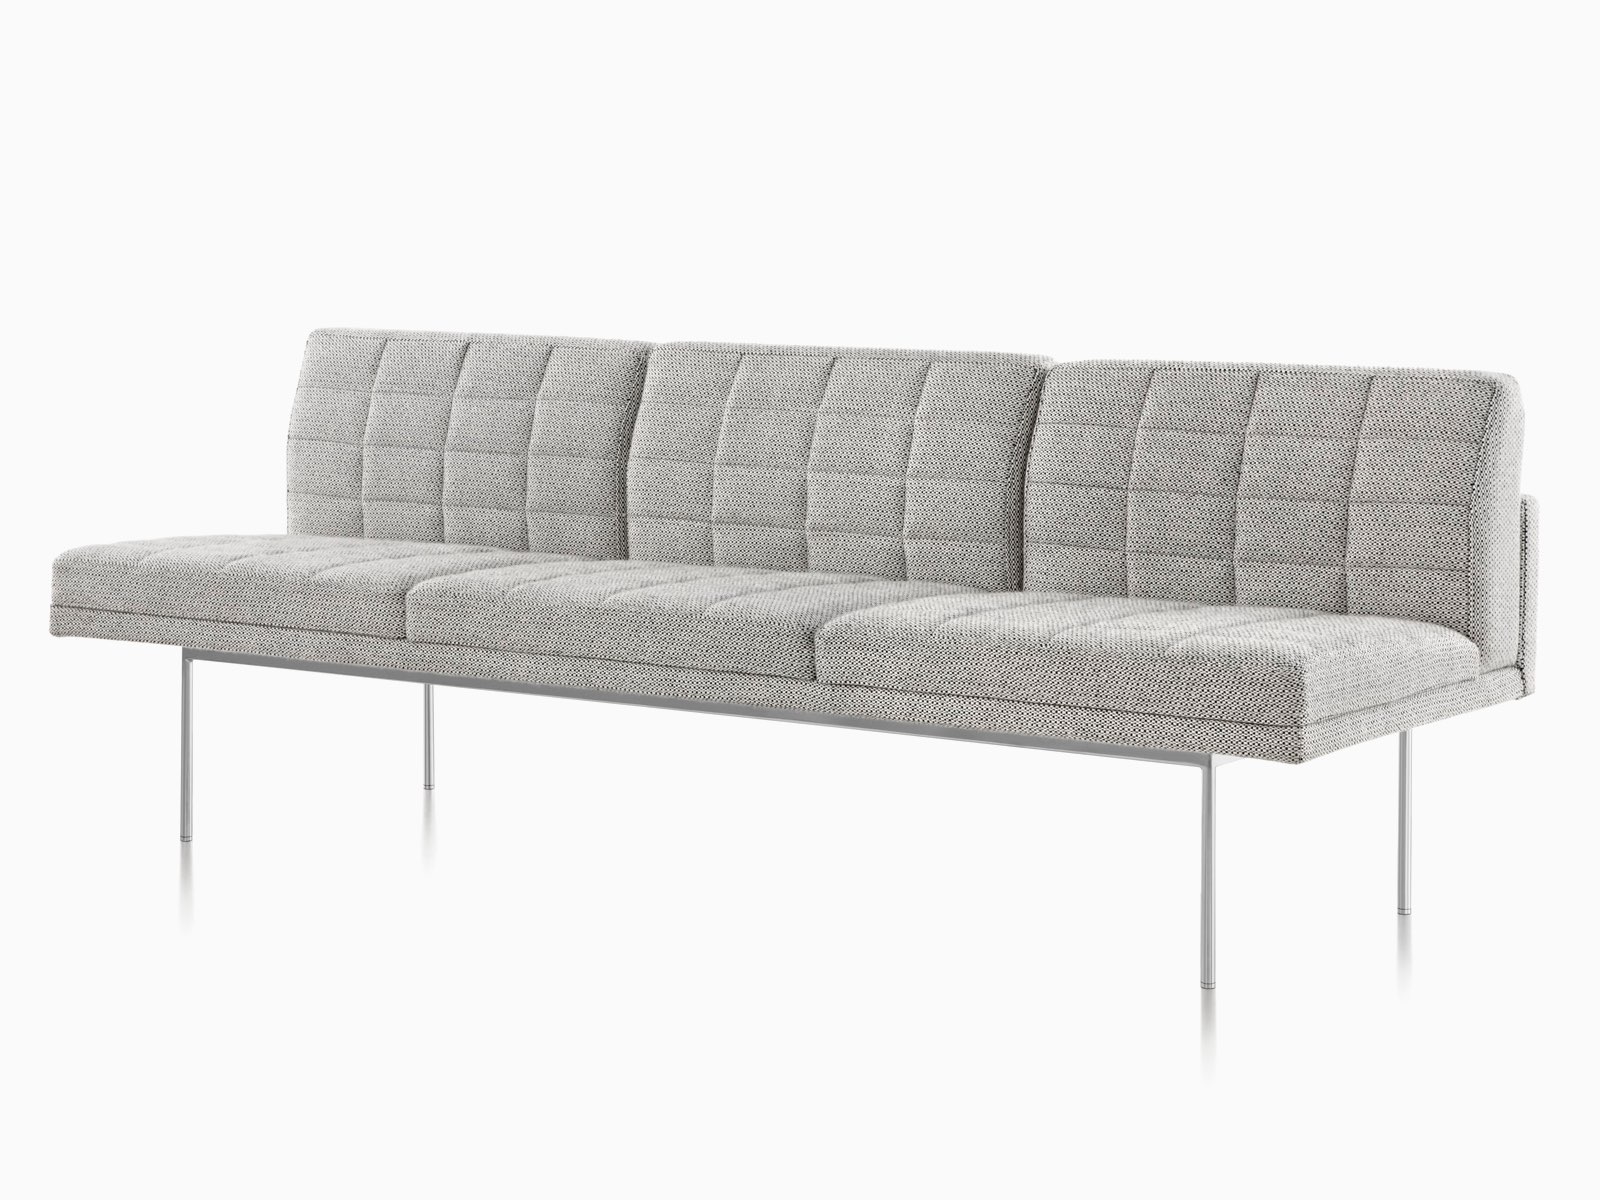 Gray Tuxedo Sofa, viewed from front.